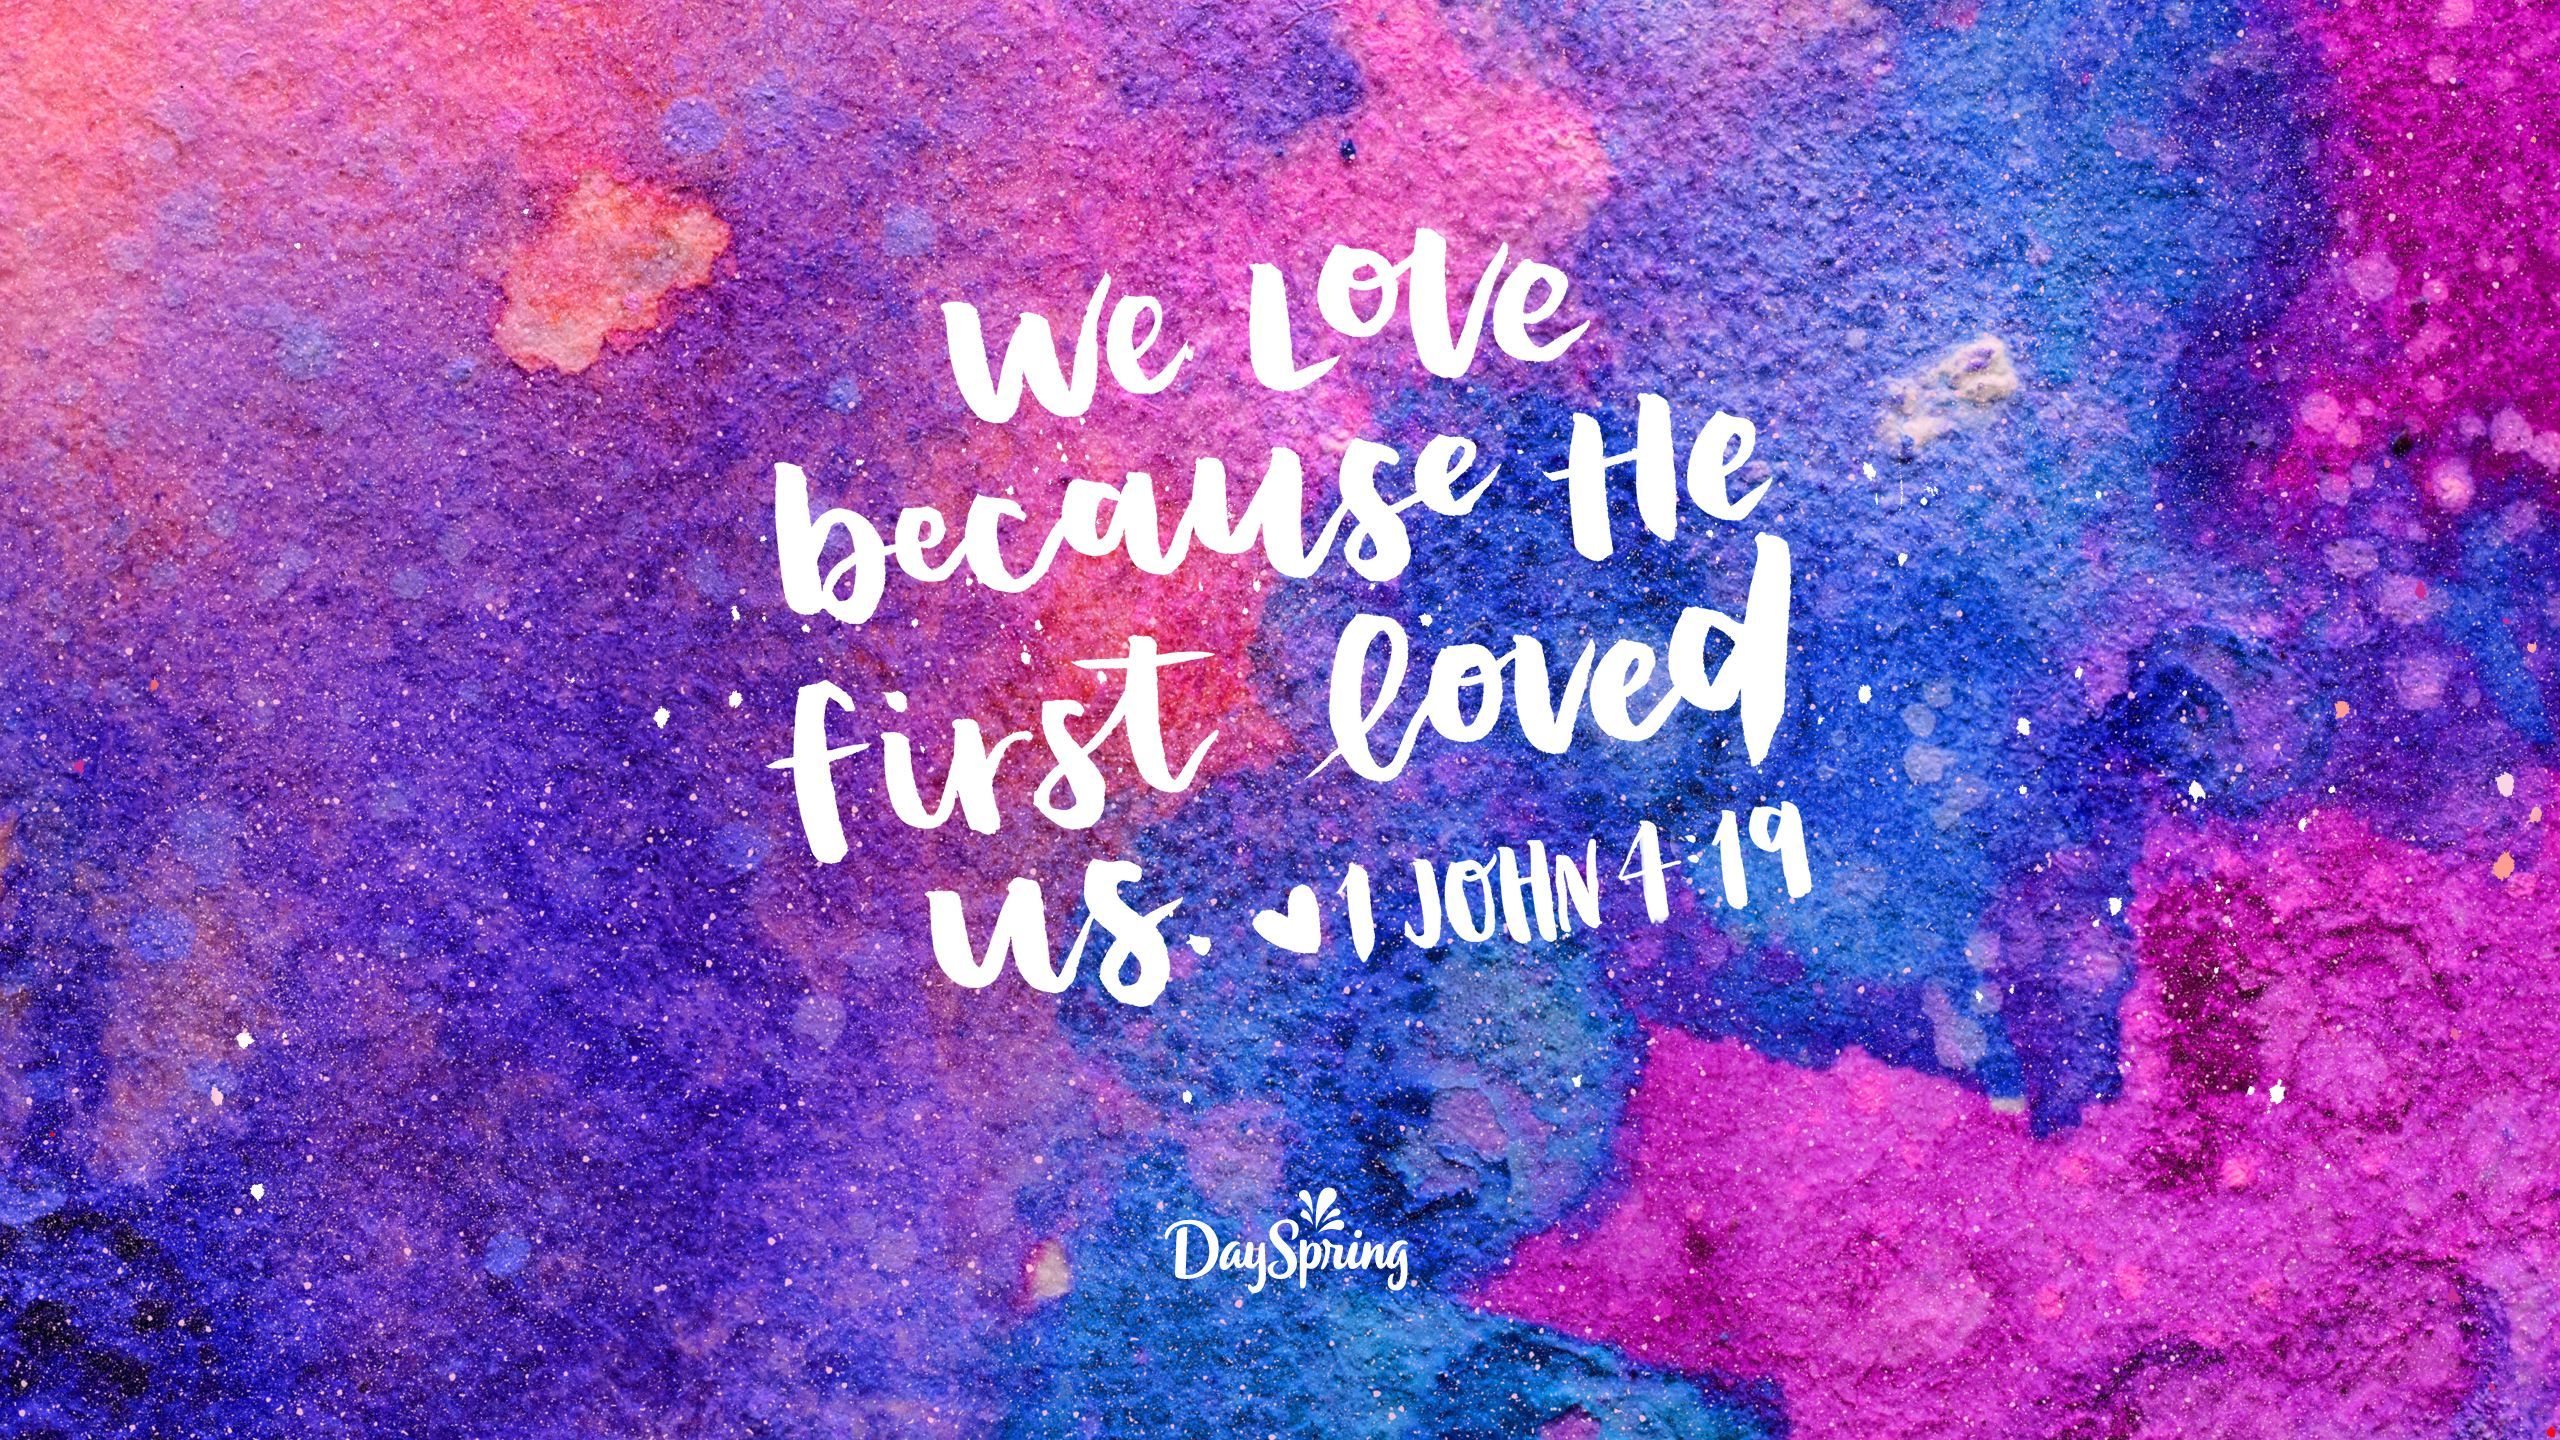 First Loved Us Wallpaper. DaySpring eCard Studio. Bible verse desktop wallpaper, Desktop wallpaper quotes, Verses wallpaper